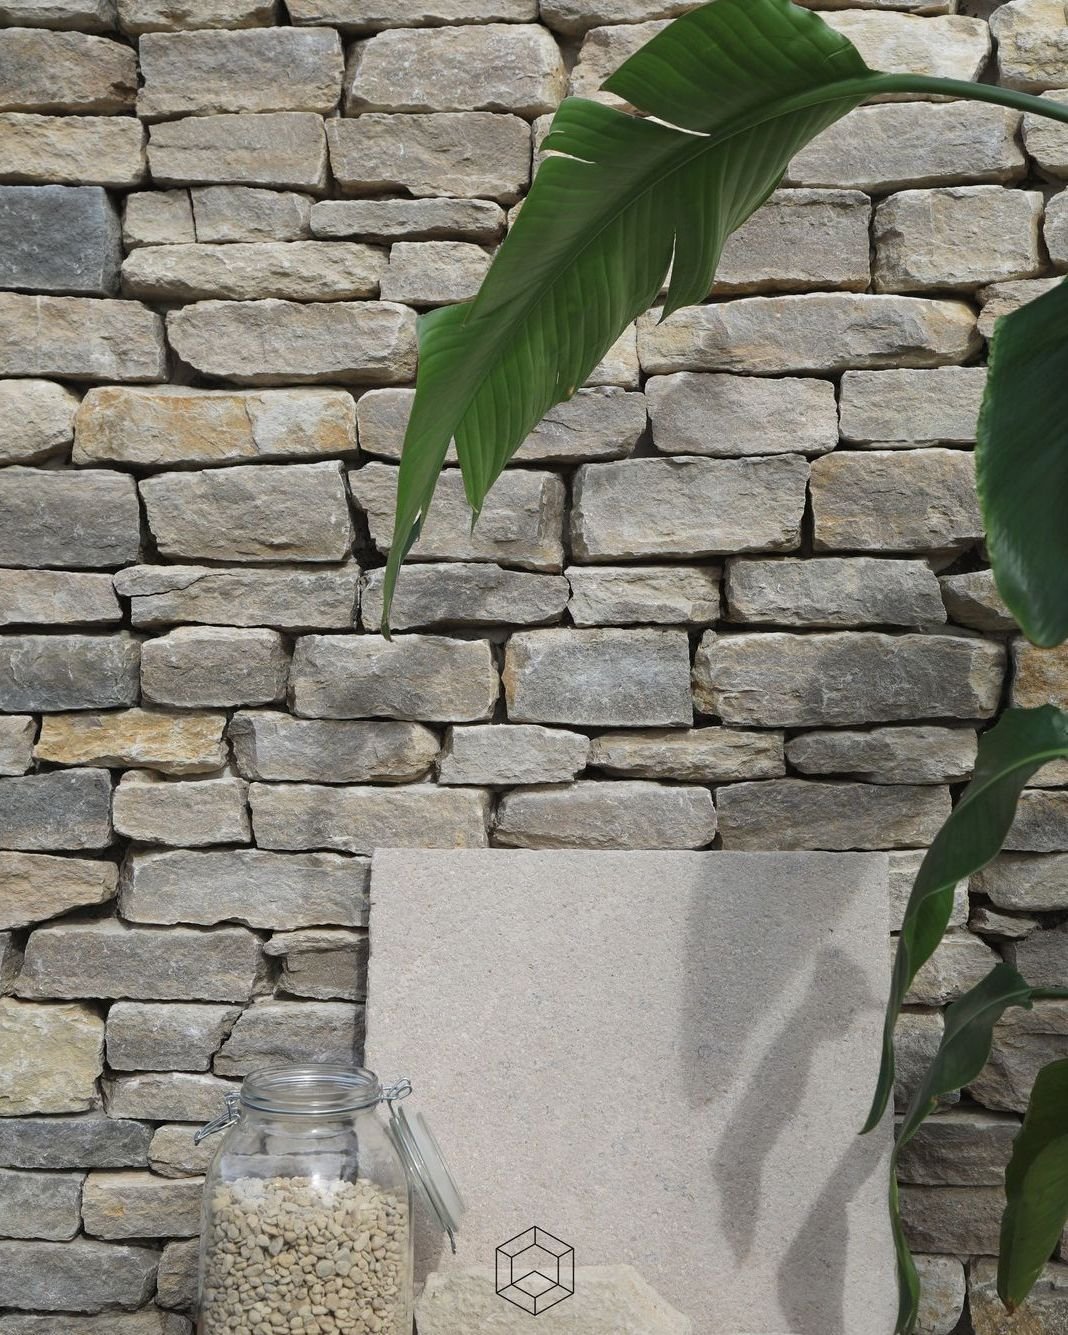 Durlston Cladding is a beautiful Purbeck limestone drystone wall cladding stone with creamy brown to pale grey tones with some prominent shell sediment layers. 
Our moodboard today combines Durlston Cladding, Zahra Aged and Cotswold pebbles 10mm.

Al